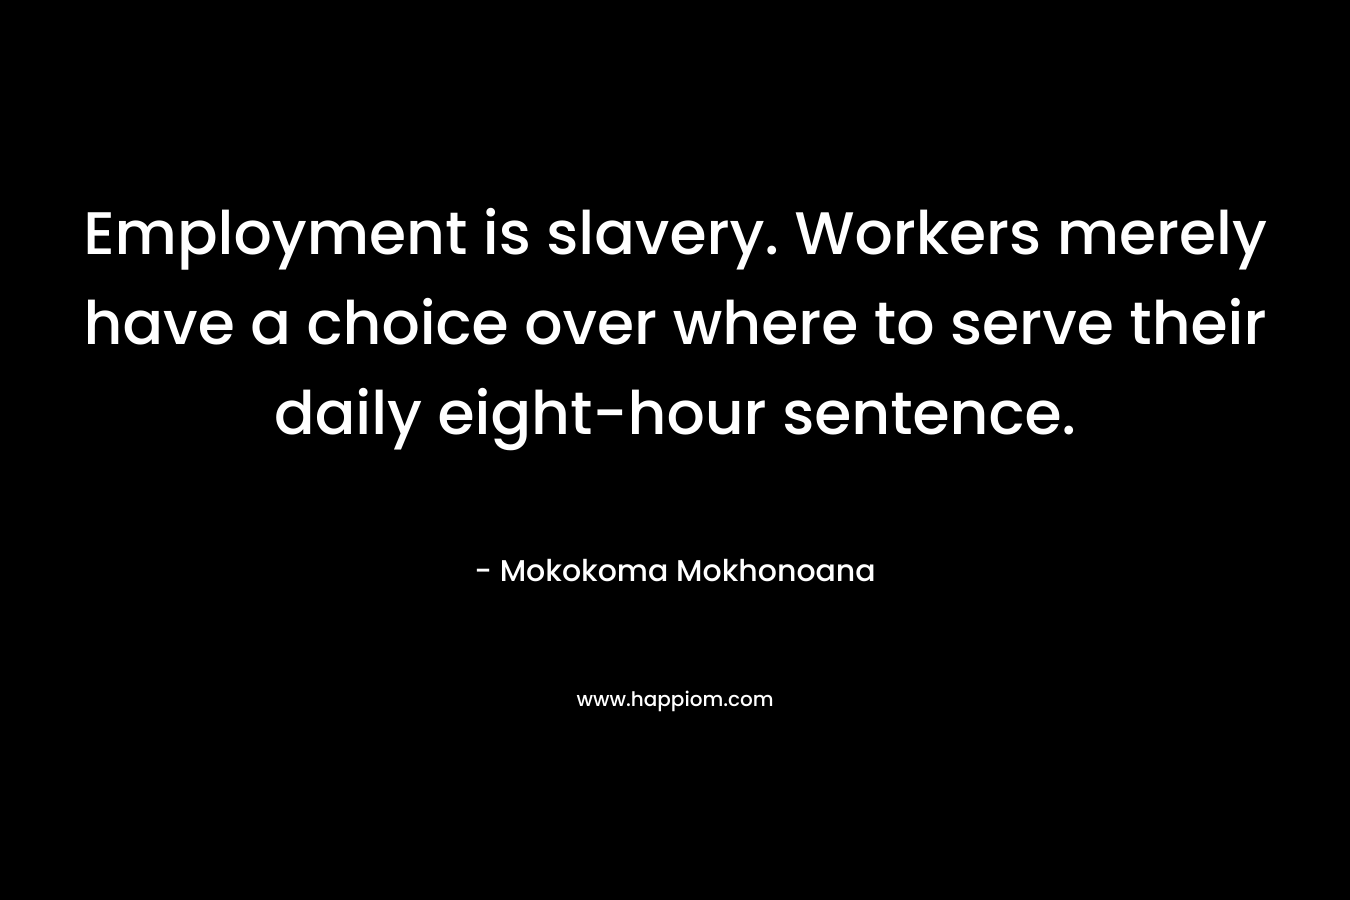 Employment is slavery. Workers merely have a choice over where to serve their daily eight-hour sentence. – Mokokoma Mokhonoana